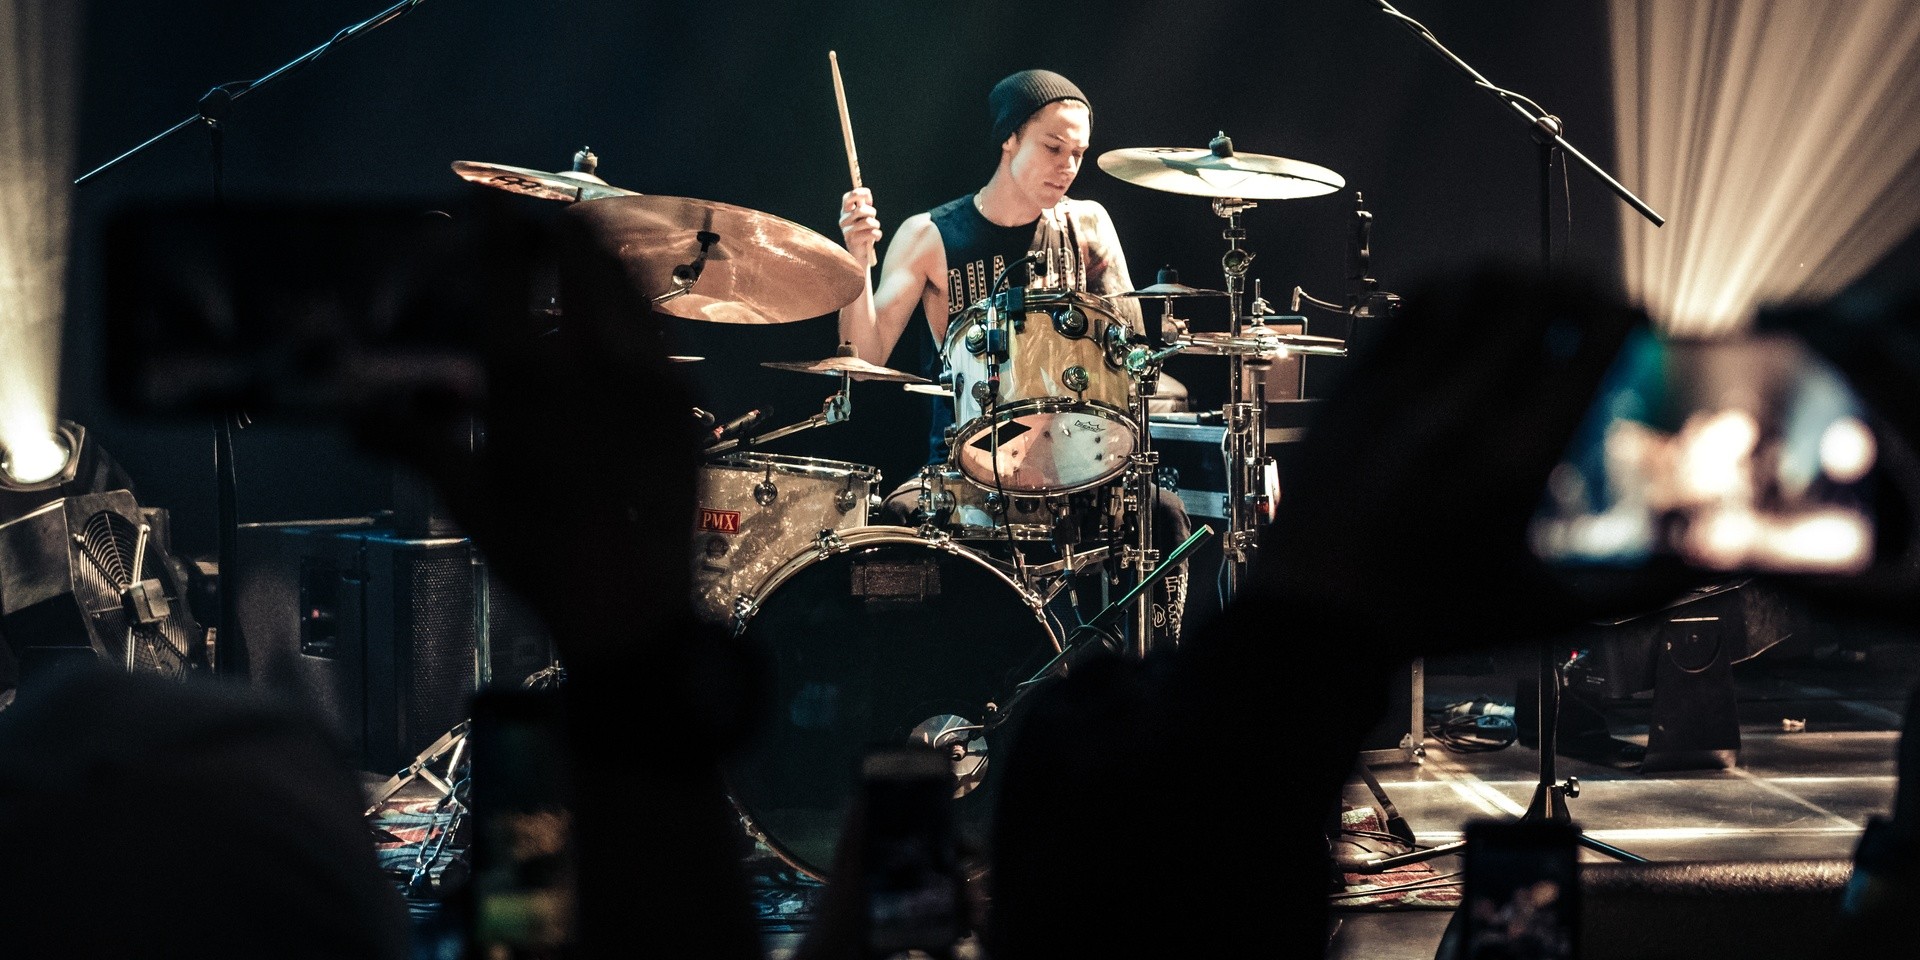 Luke Holland ensnares the hearts of the attendees of his breakbeat Manila show – photo gallery